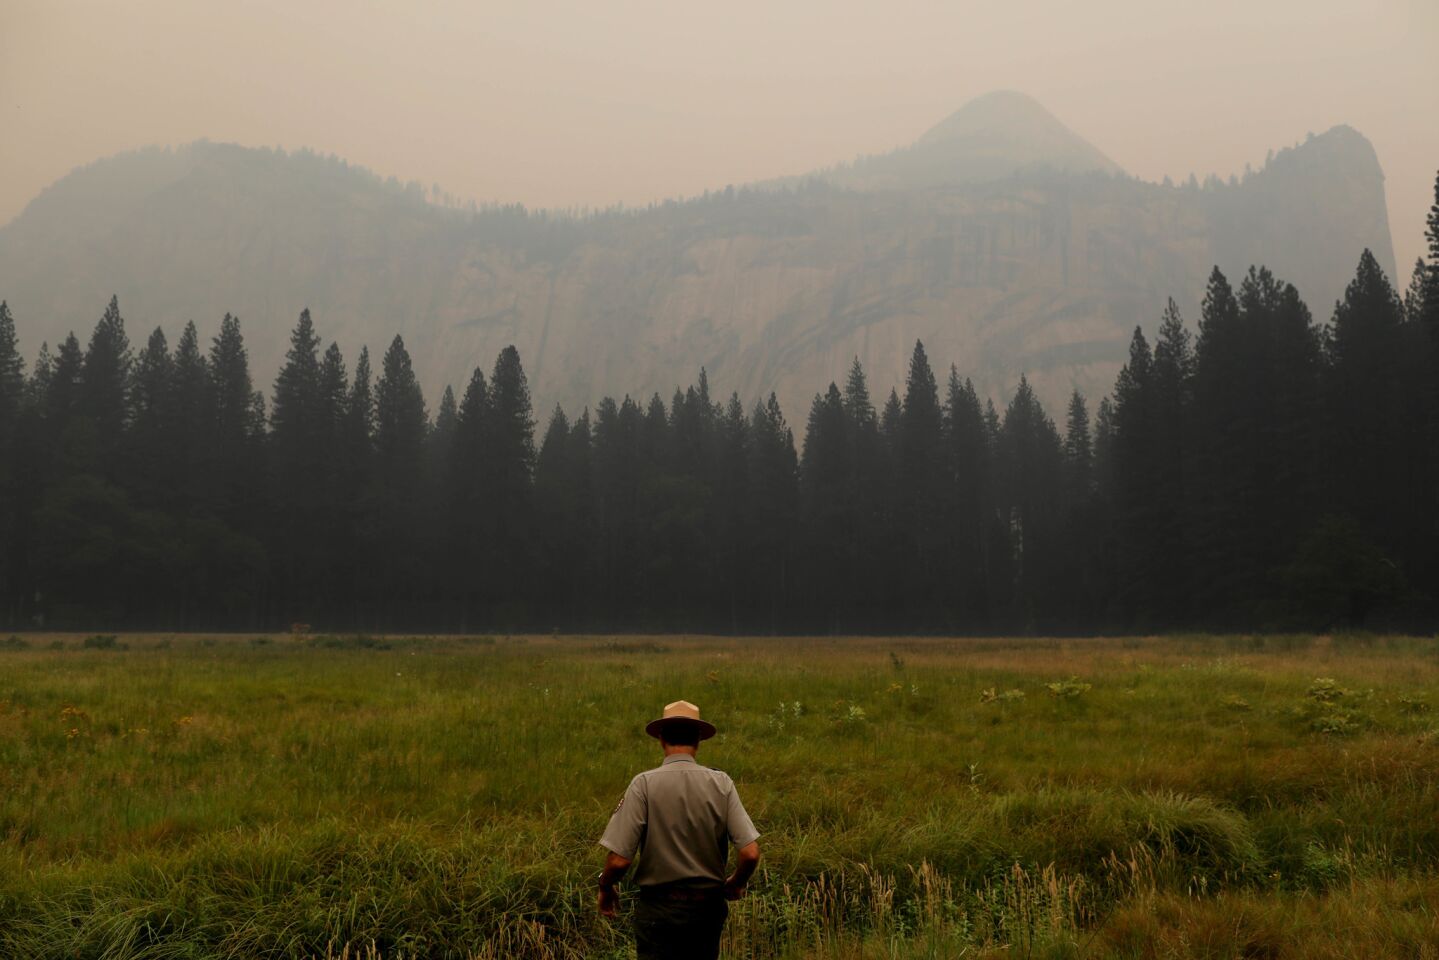 Scott Gediman, public affairs officer Yosemite National Park, walks across Stoneman Meadow in the Yosemite Valley, one of the park's most popular places.